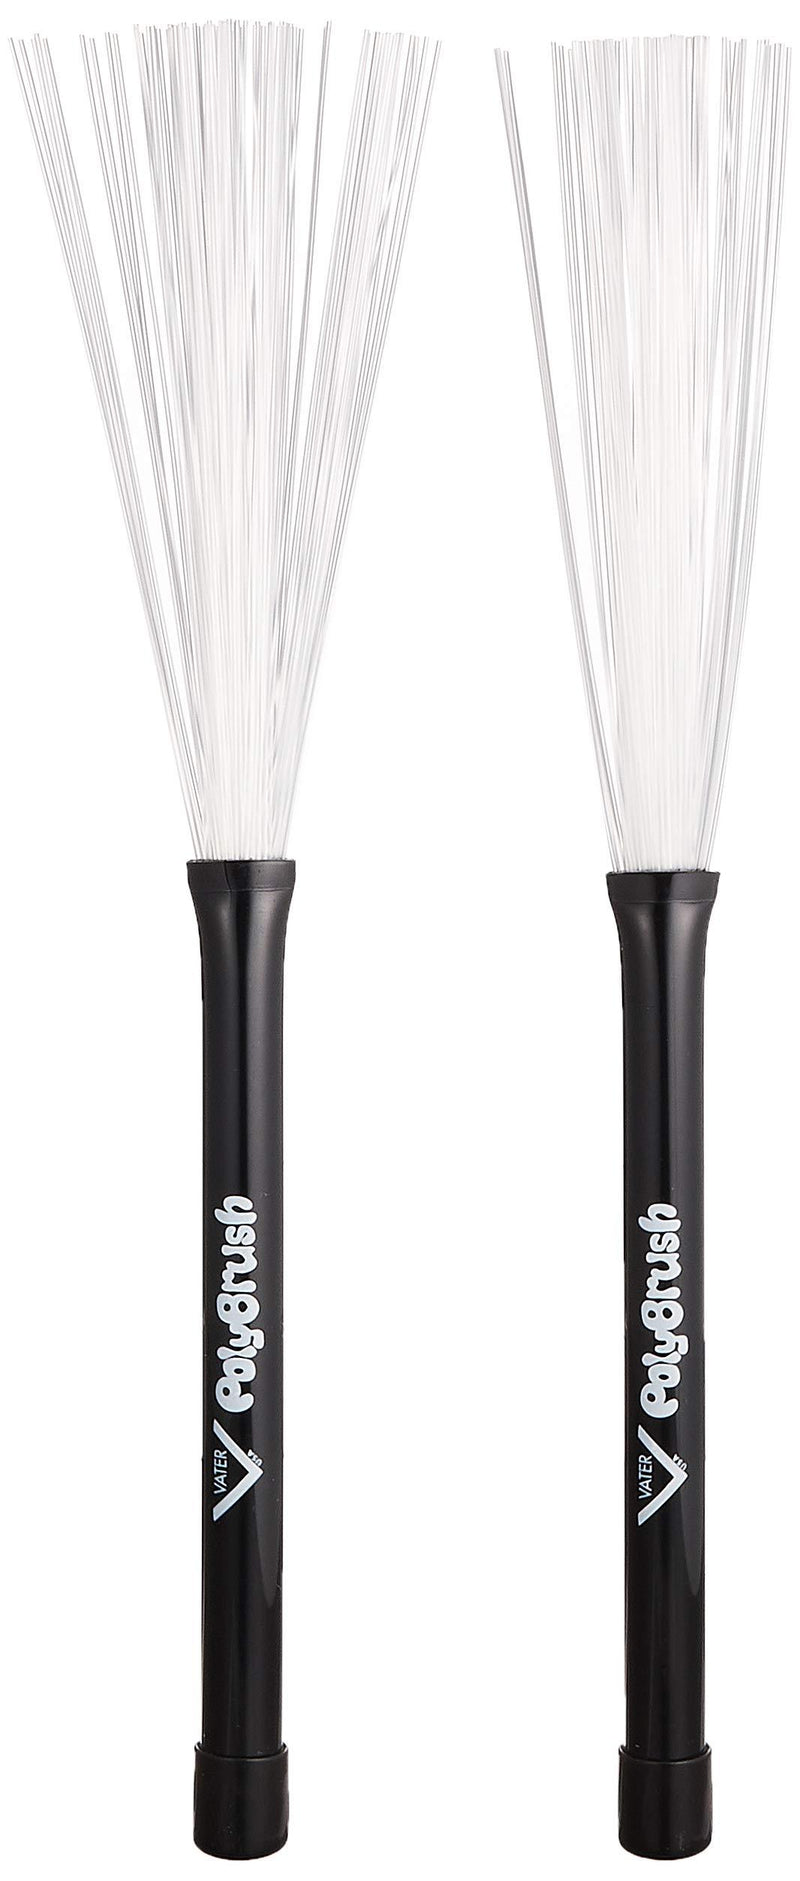 Vater Poly Brush with Retractable Nylon Bristles